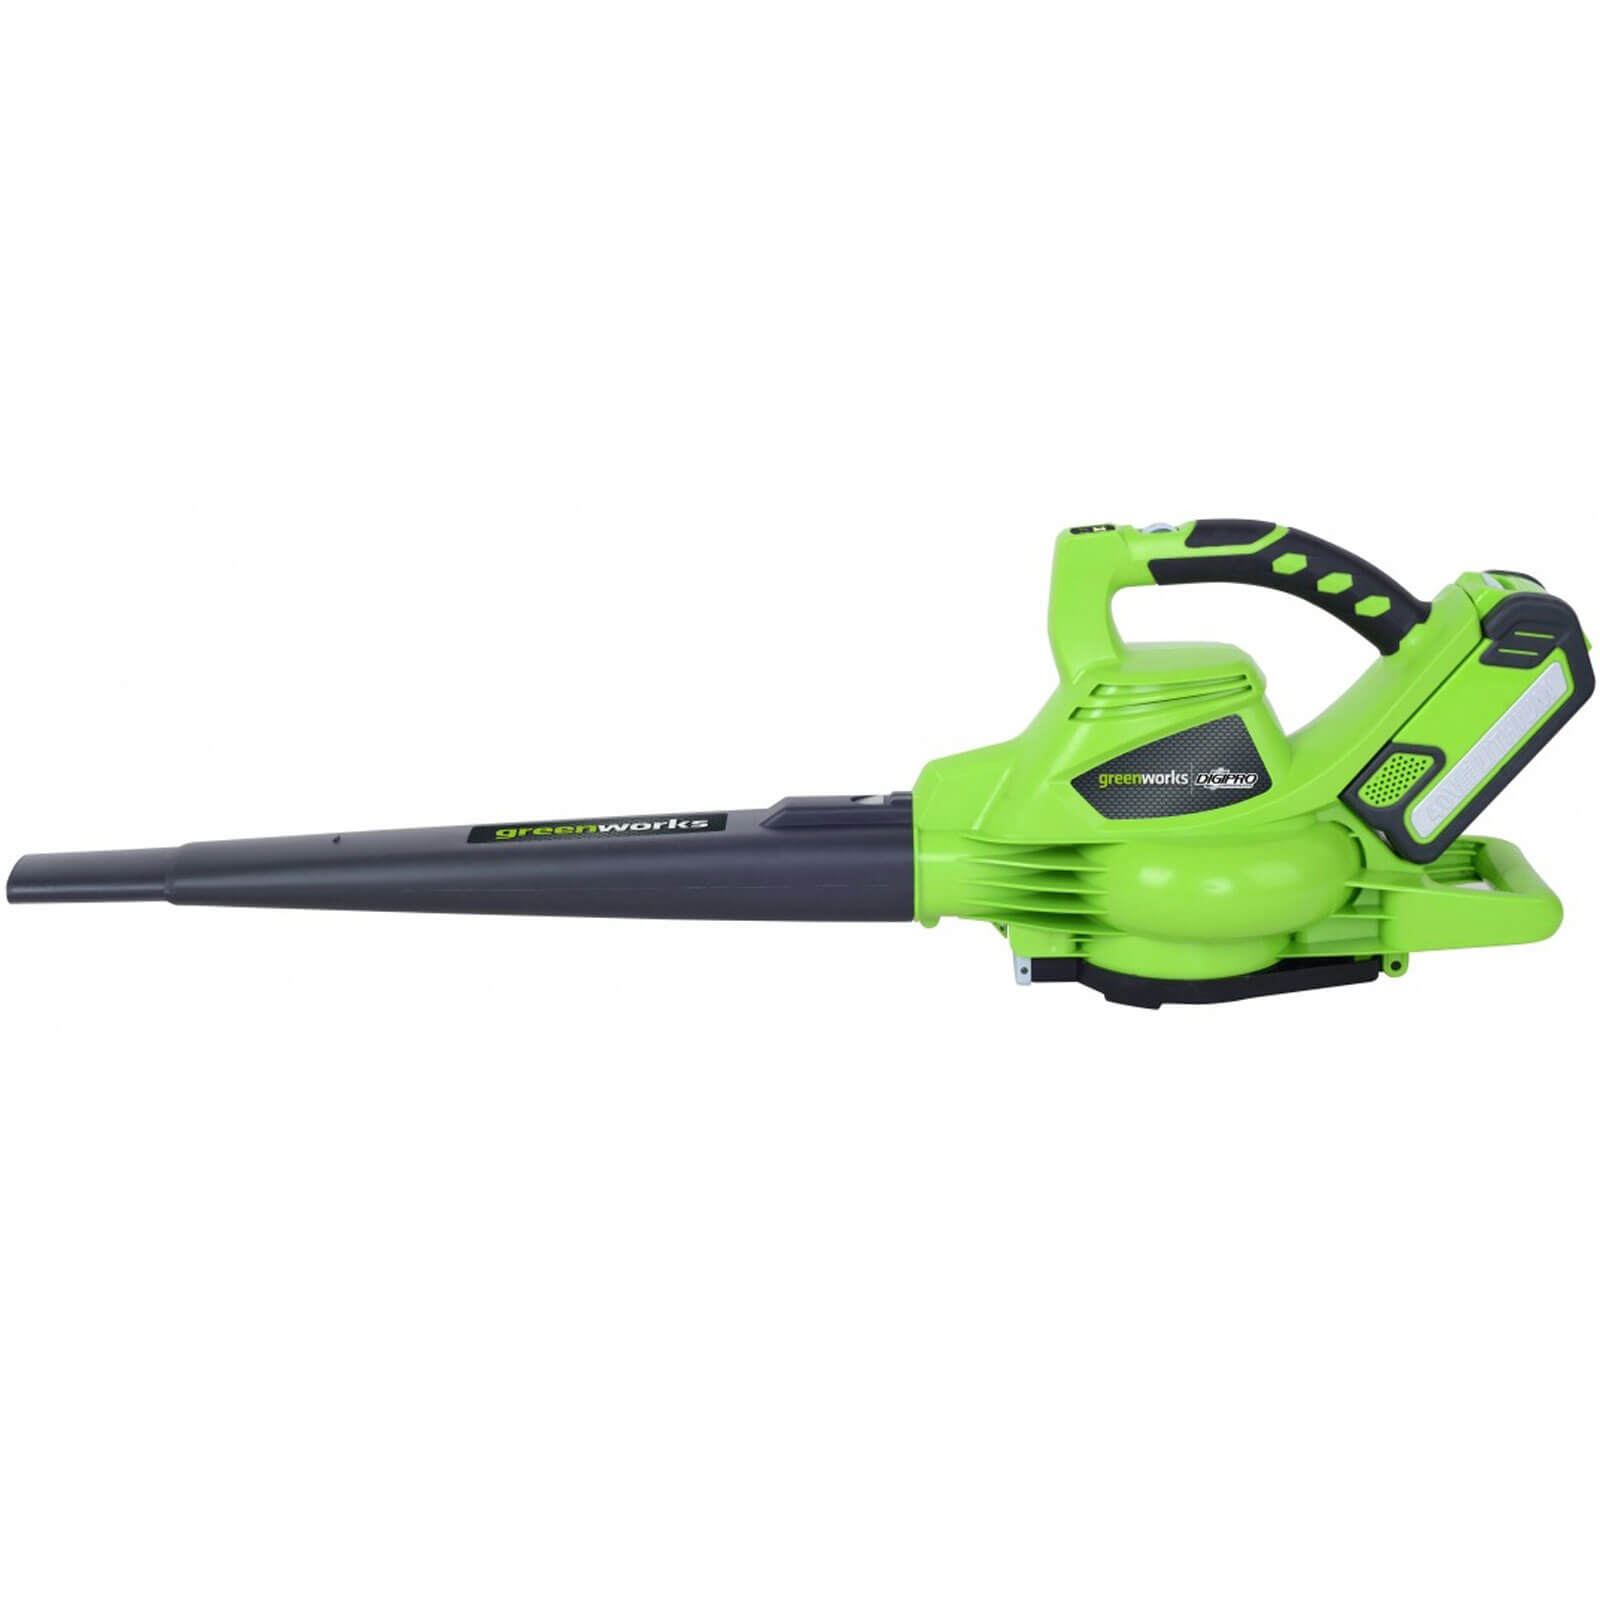 Li-Ion 40 V 280 km//Hour Air Speed 45 l Bag Speed Control Powerful Brushless Motor Without Battery and Charger /& G40B2 Battery Greenworks Tools GD40BV Cordless Leaf Blower and Vacuum 2-in-1